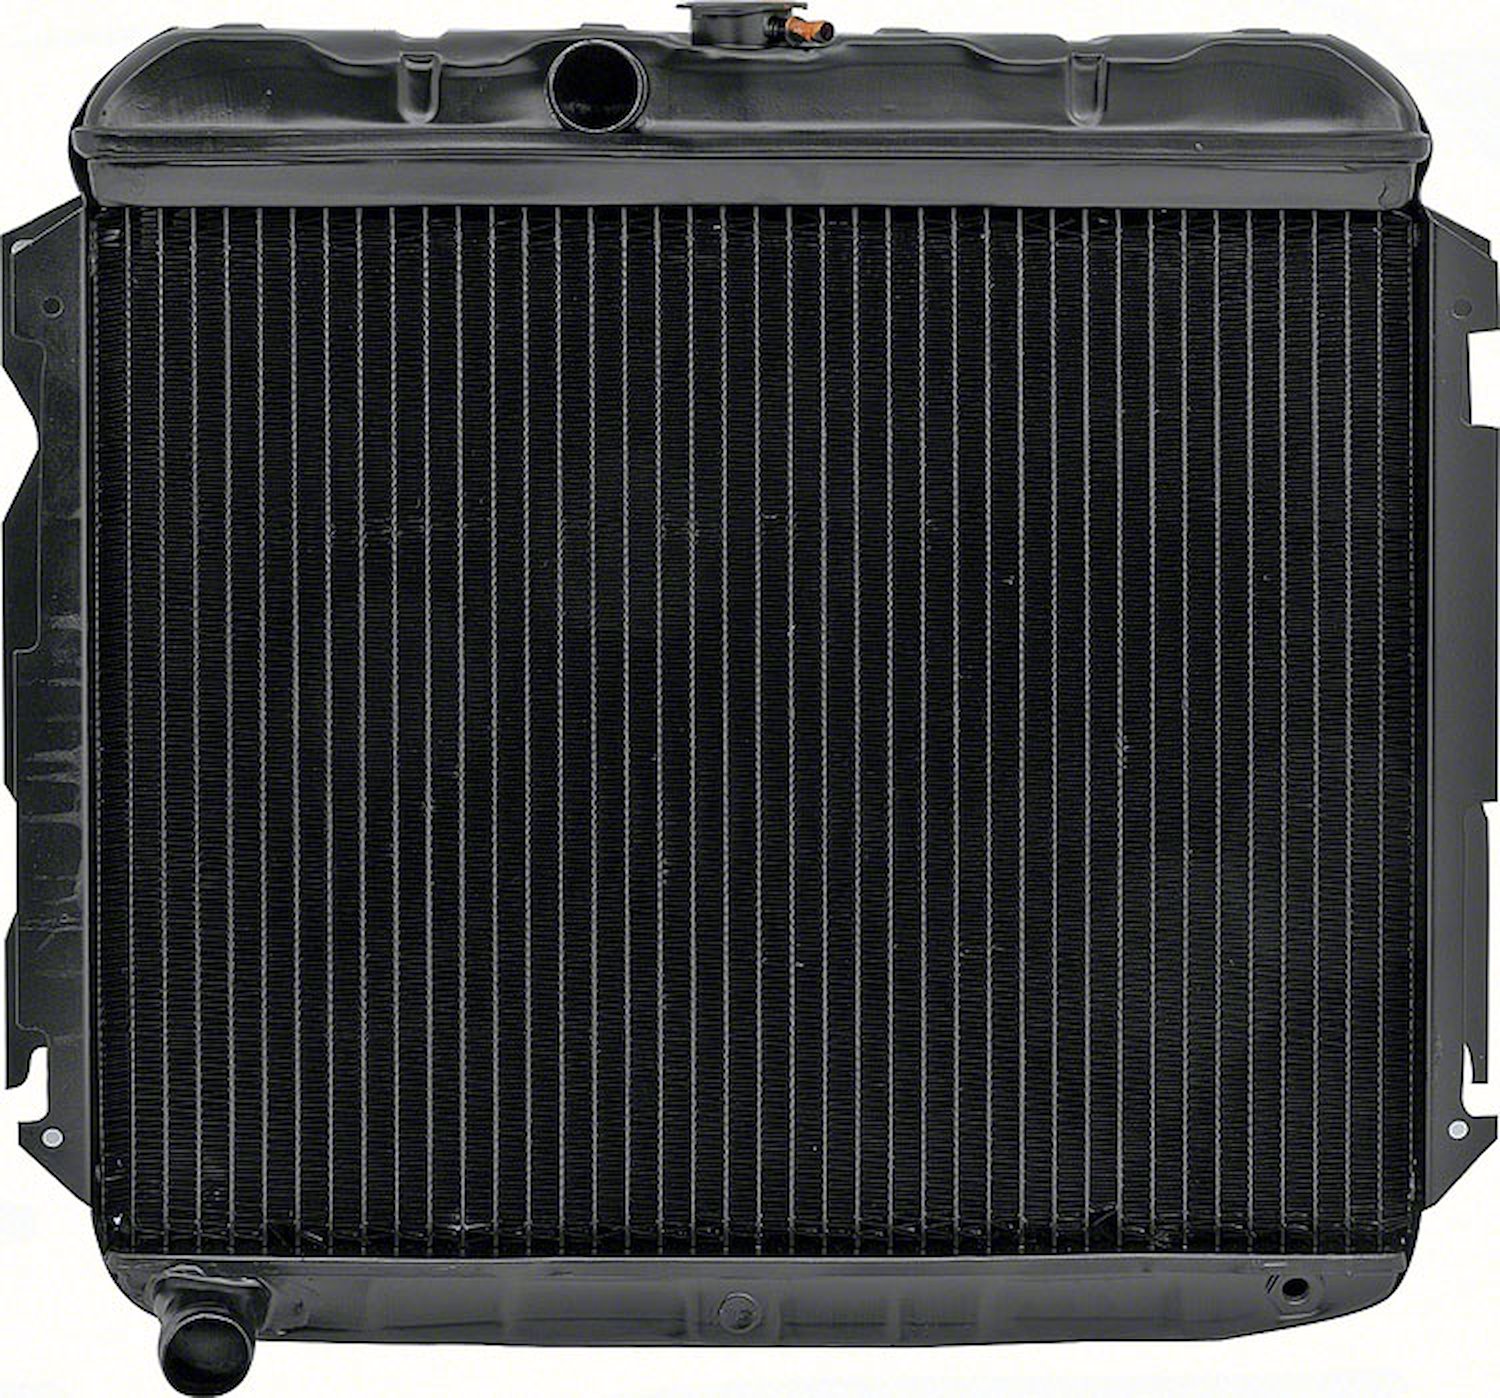 MB2367S Replacement Radiator 1966-69 Mopar B-Body V8 318Ci/340Ci With Standard Trans 3 Row 22" Wide